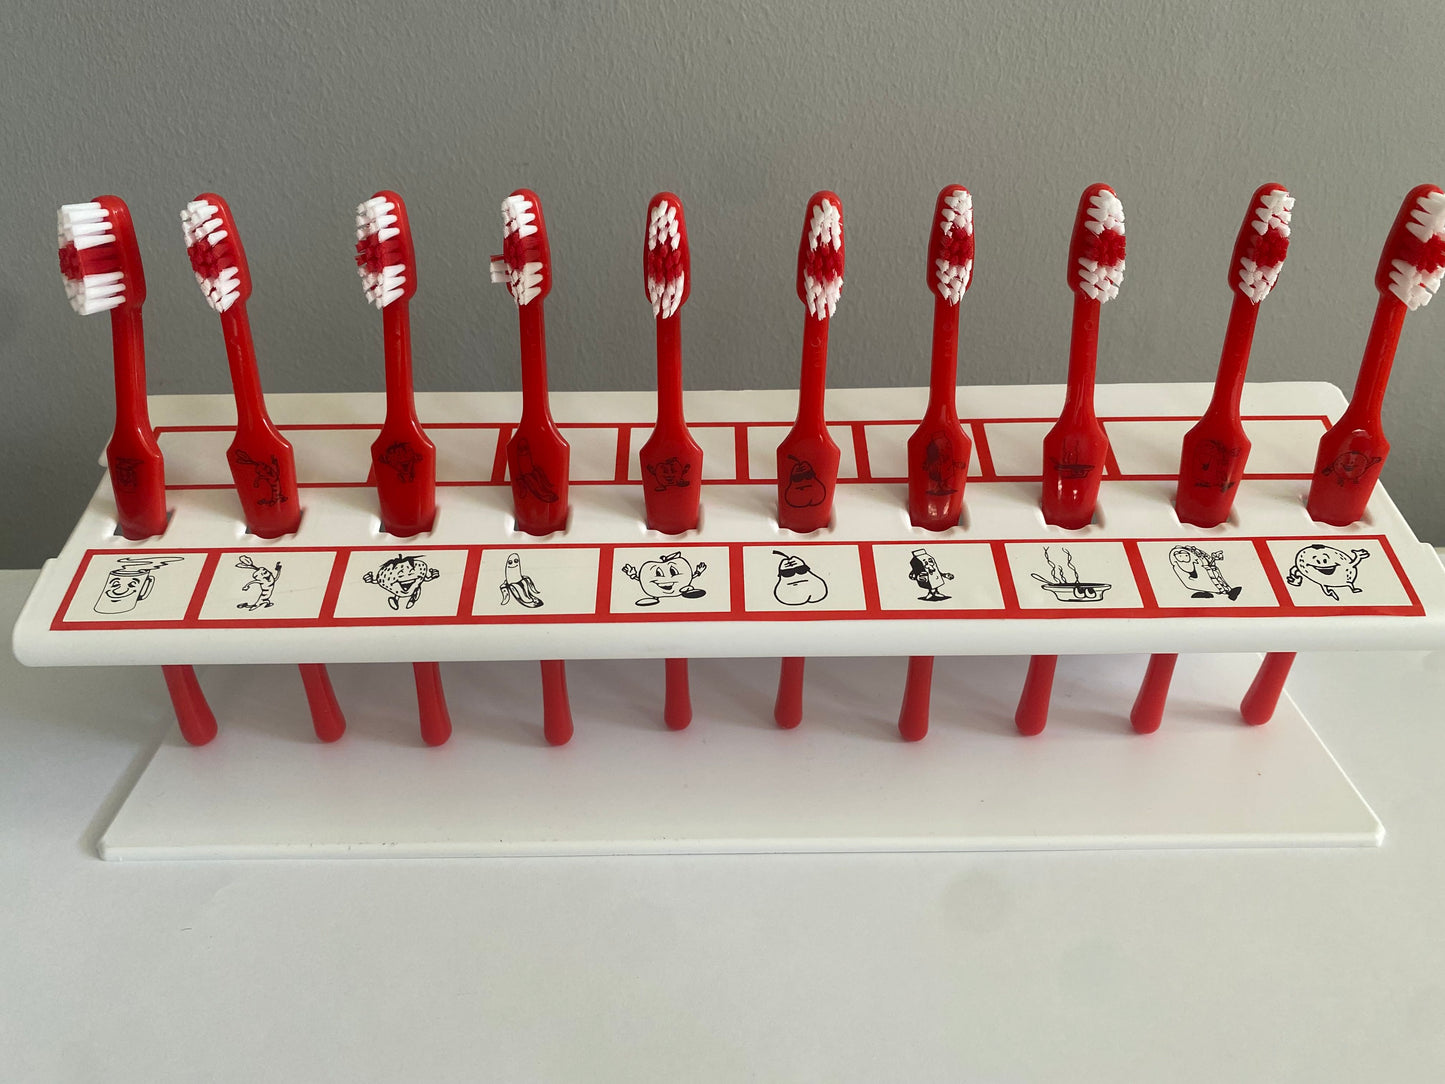 Toothbrush Rack with Healthy Snack symbols